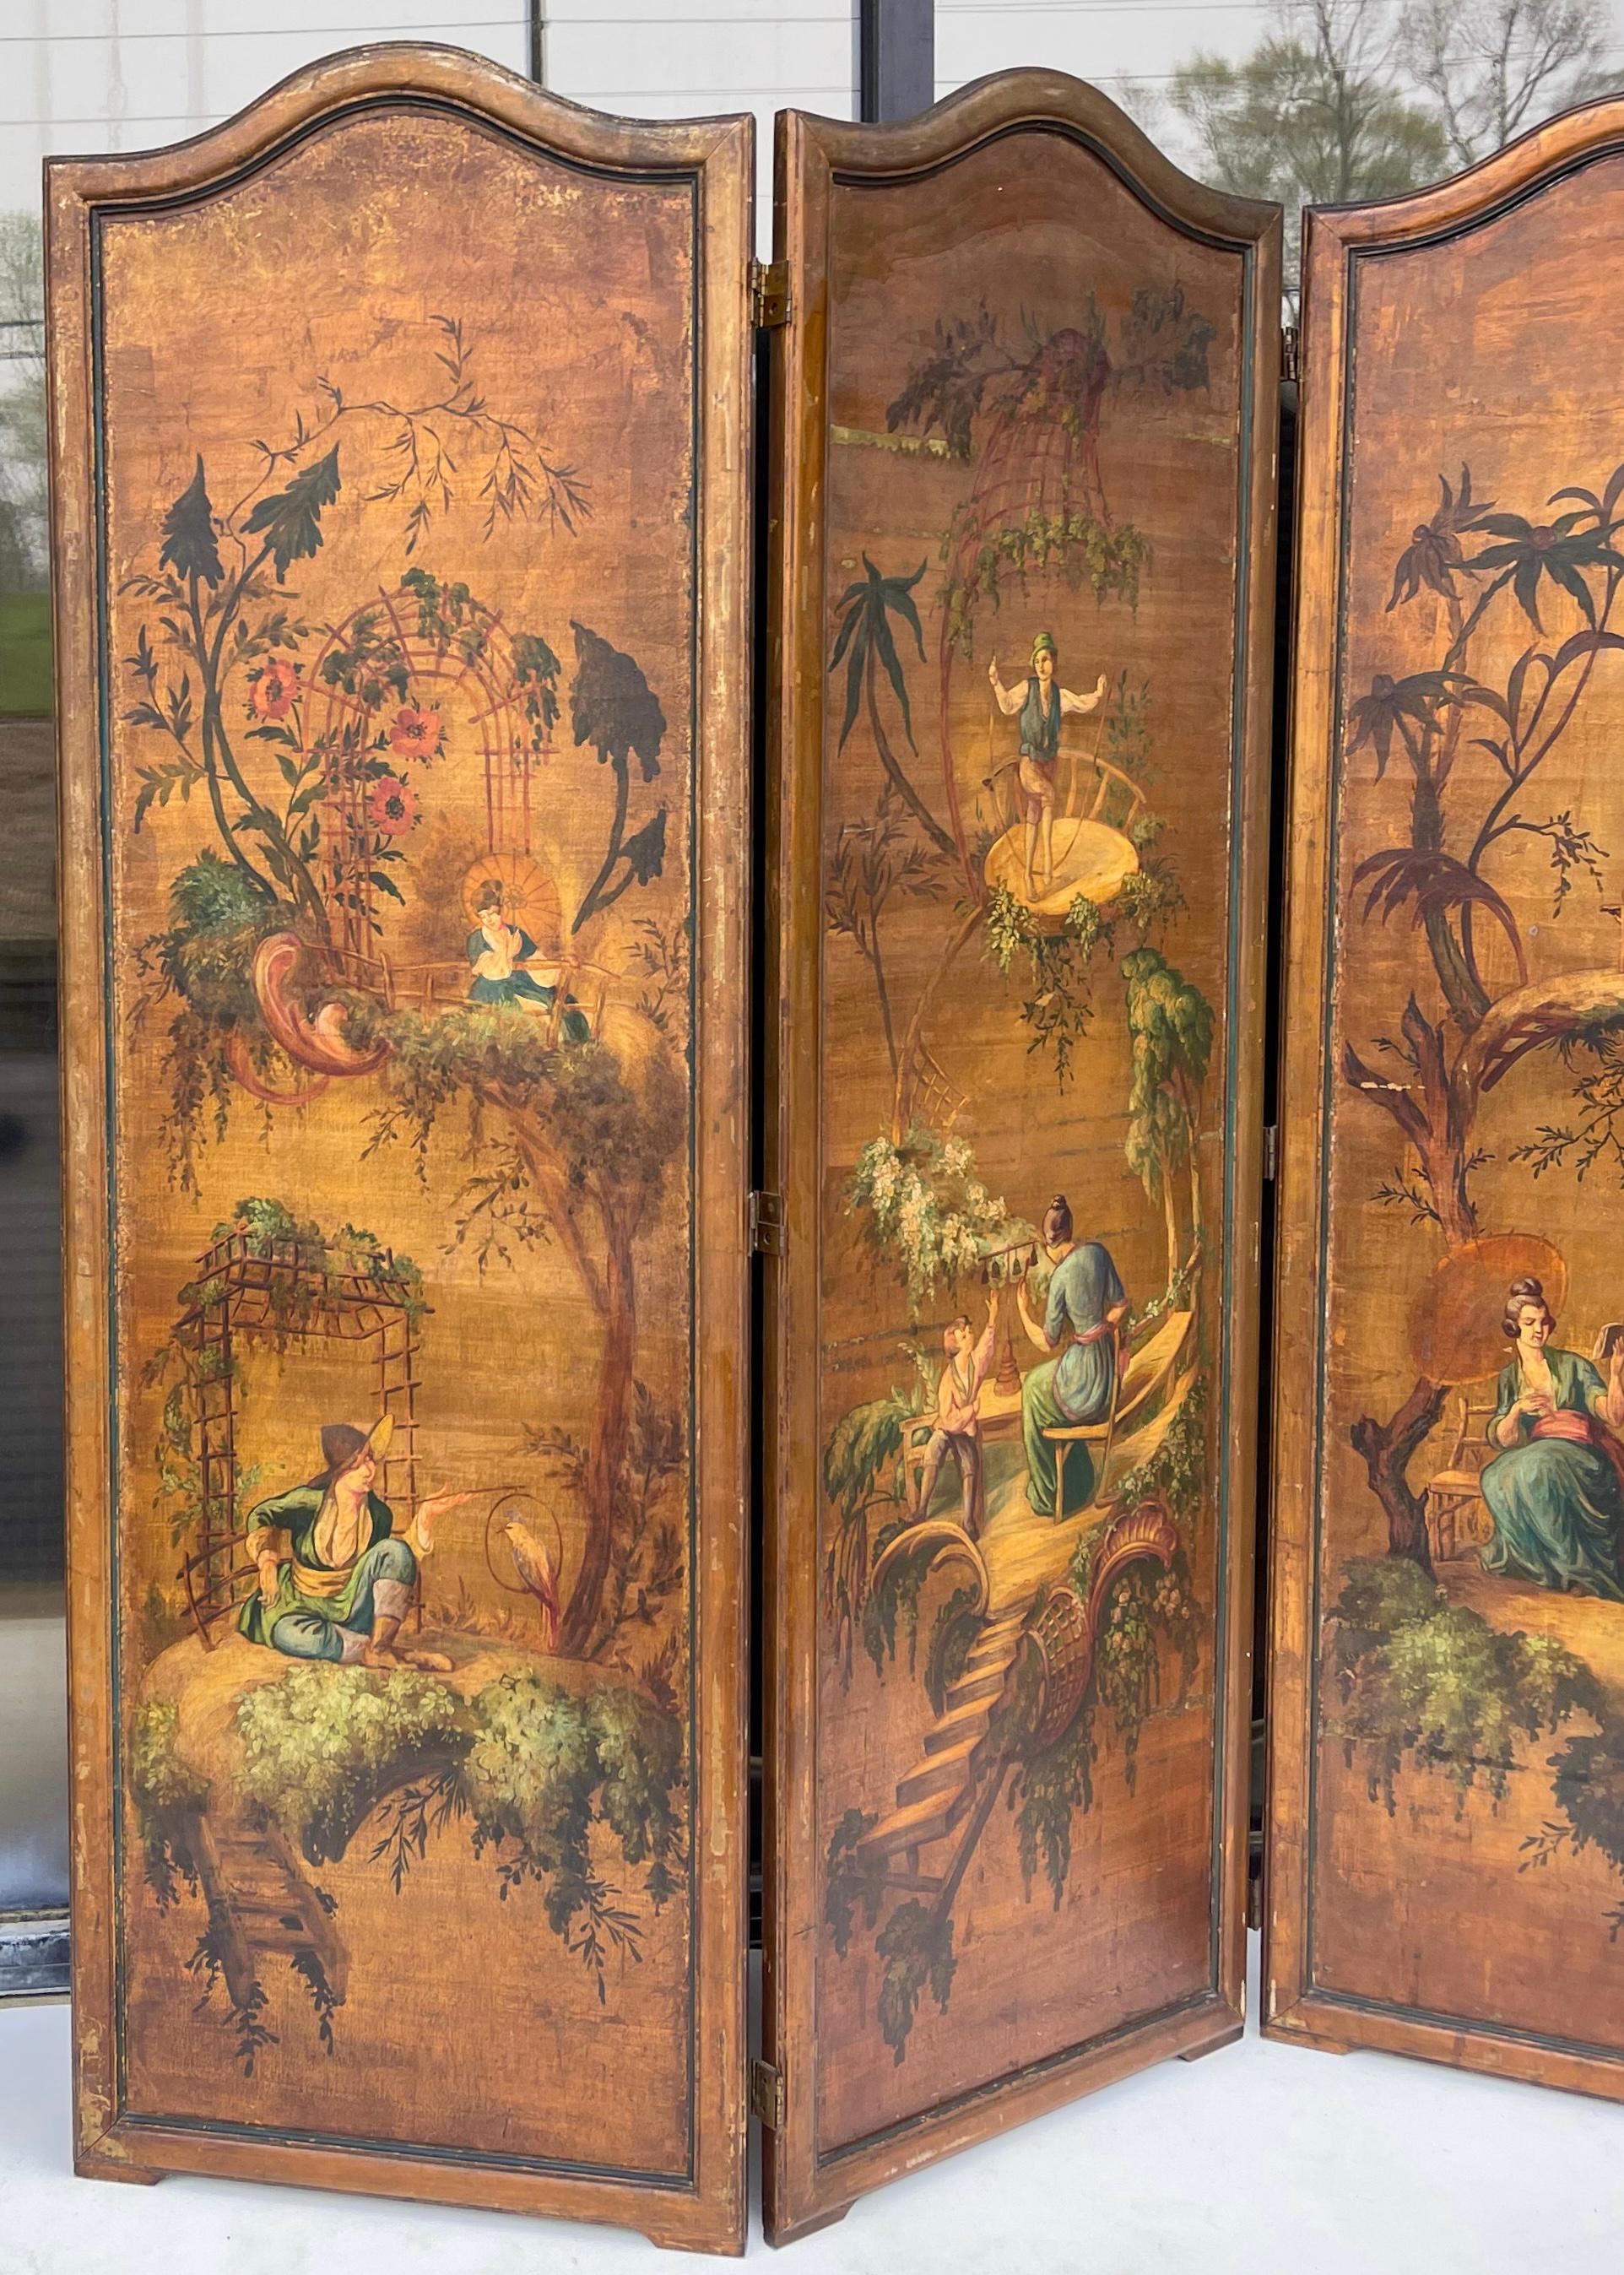 20th Century Early 20th-C. Hand Painted French Chinoiserie Oil On Canvas Screen - 3 Panels  For Sale